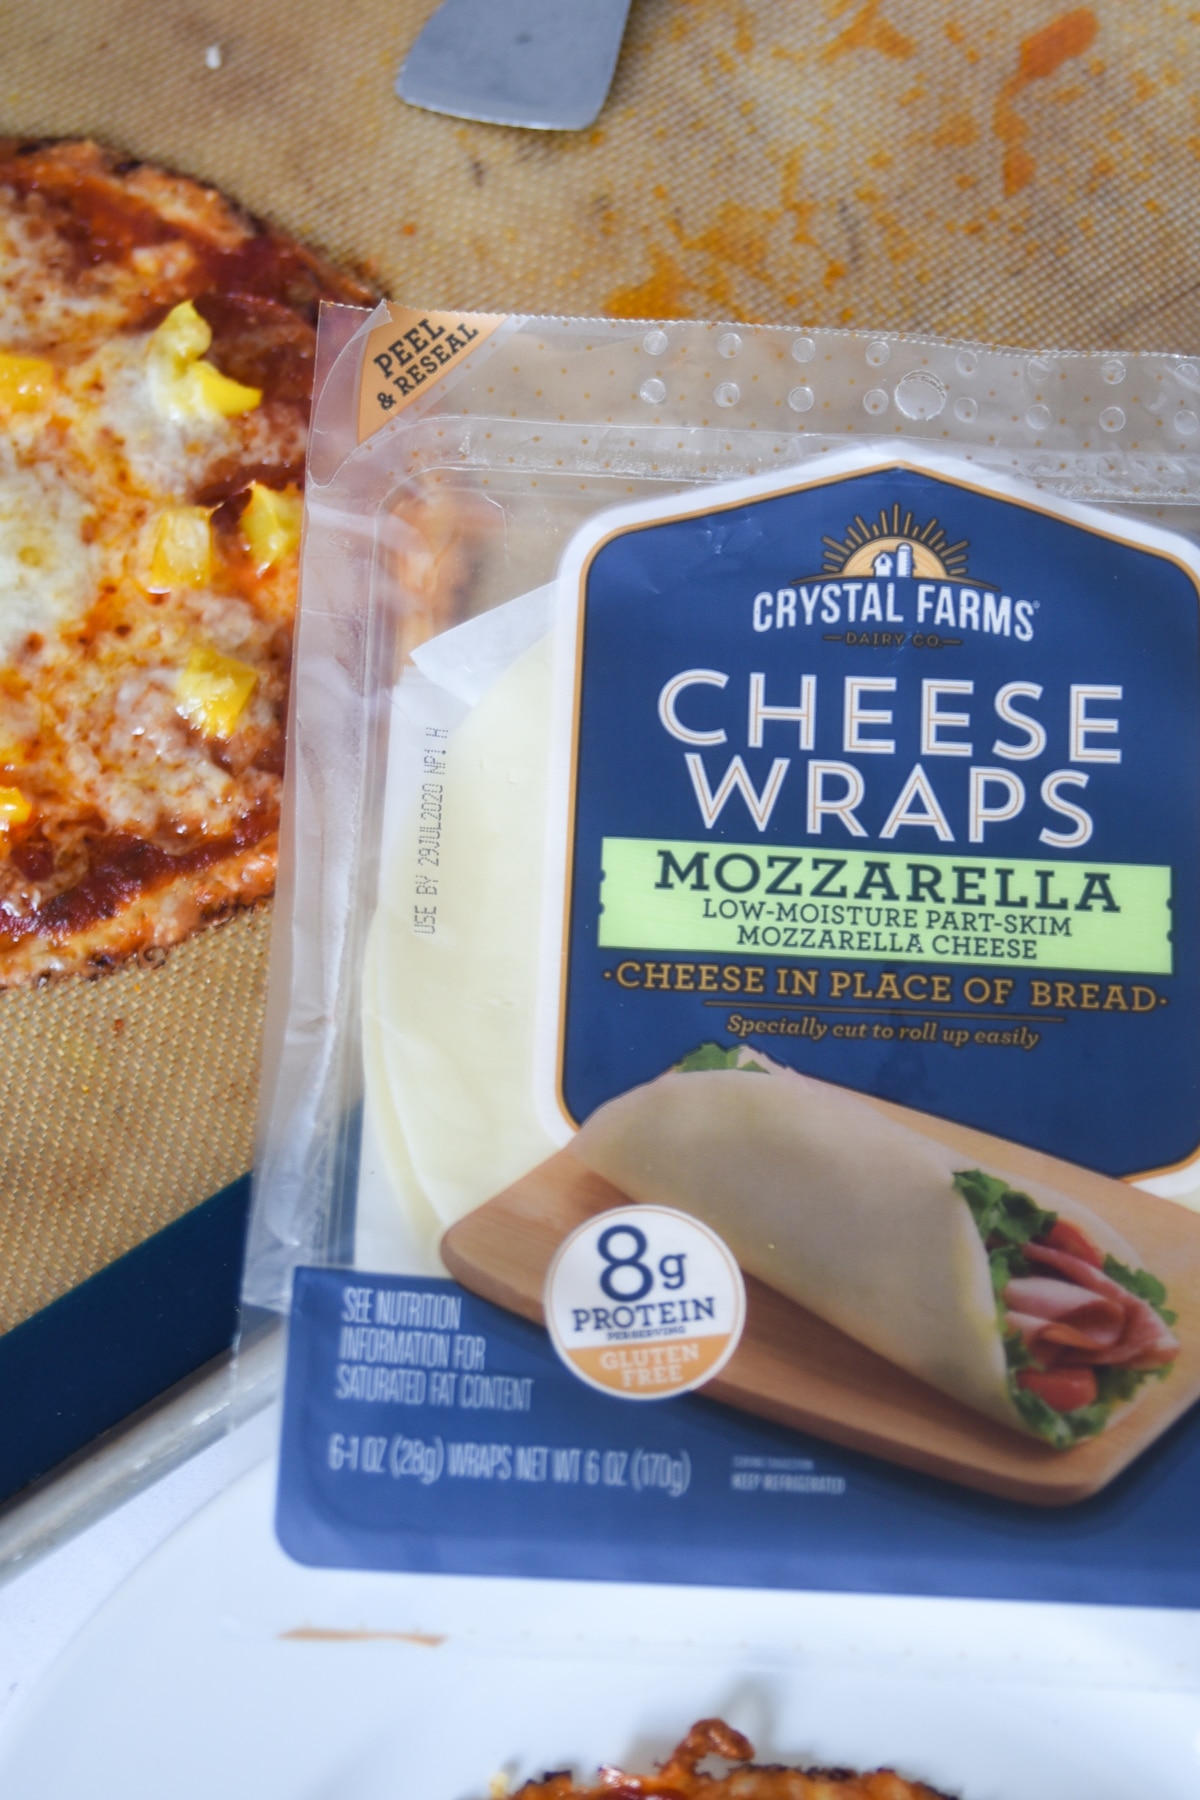 Crystal Farms Cheese Wraps next to a cheese pizza crust